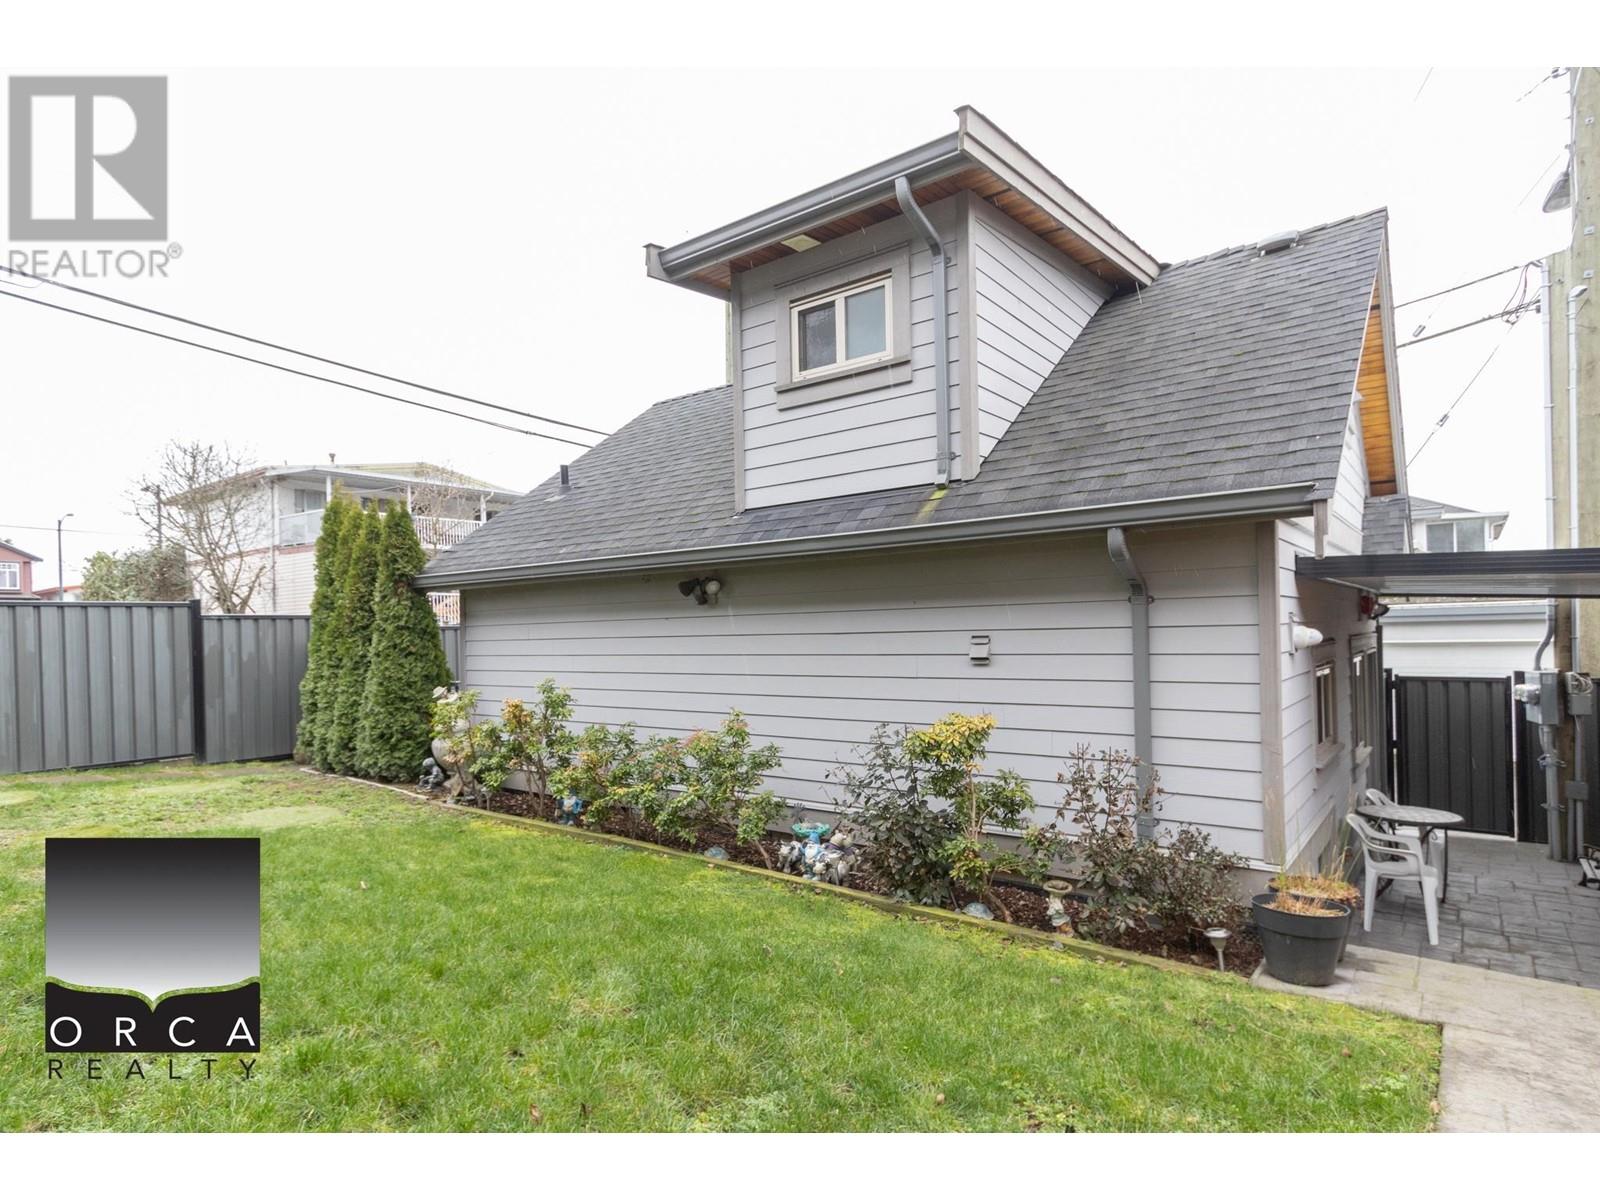 For rent: 180 Lane Way House-E 60th Ave 60TH AVE AVENUE, Vancouver